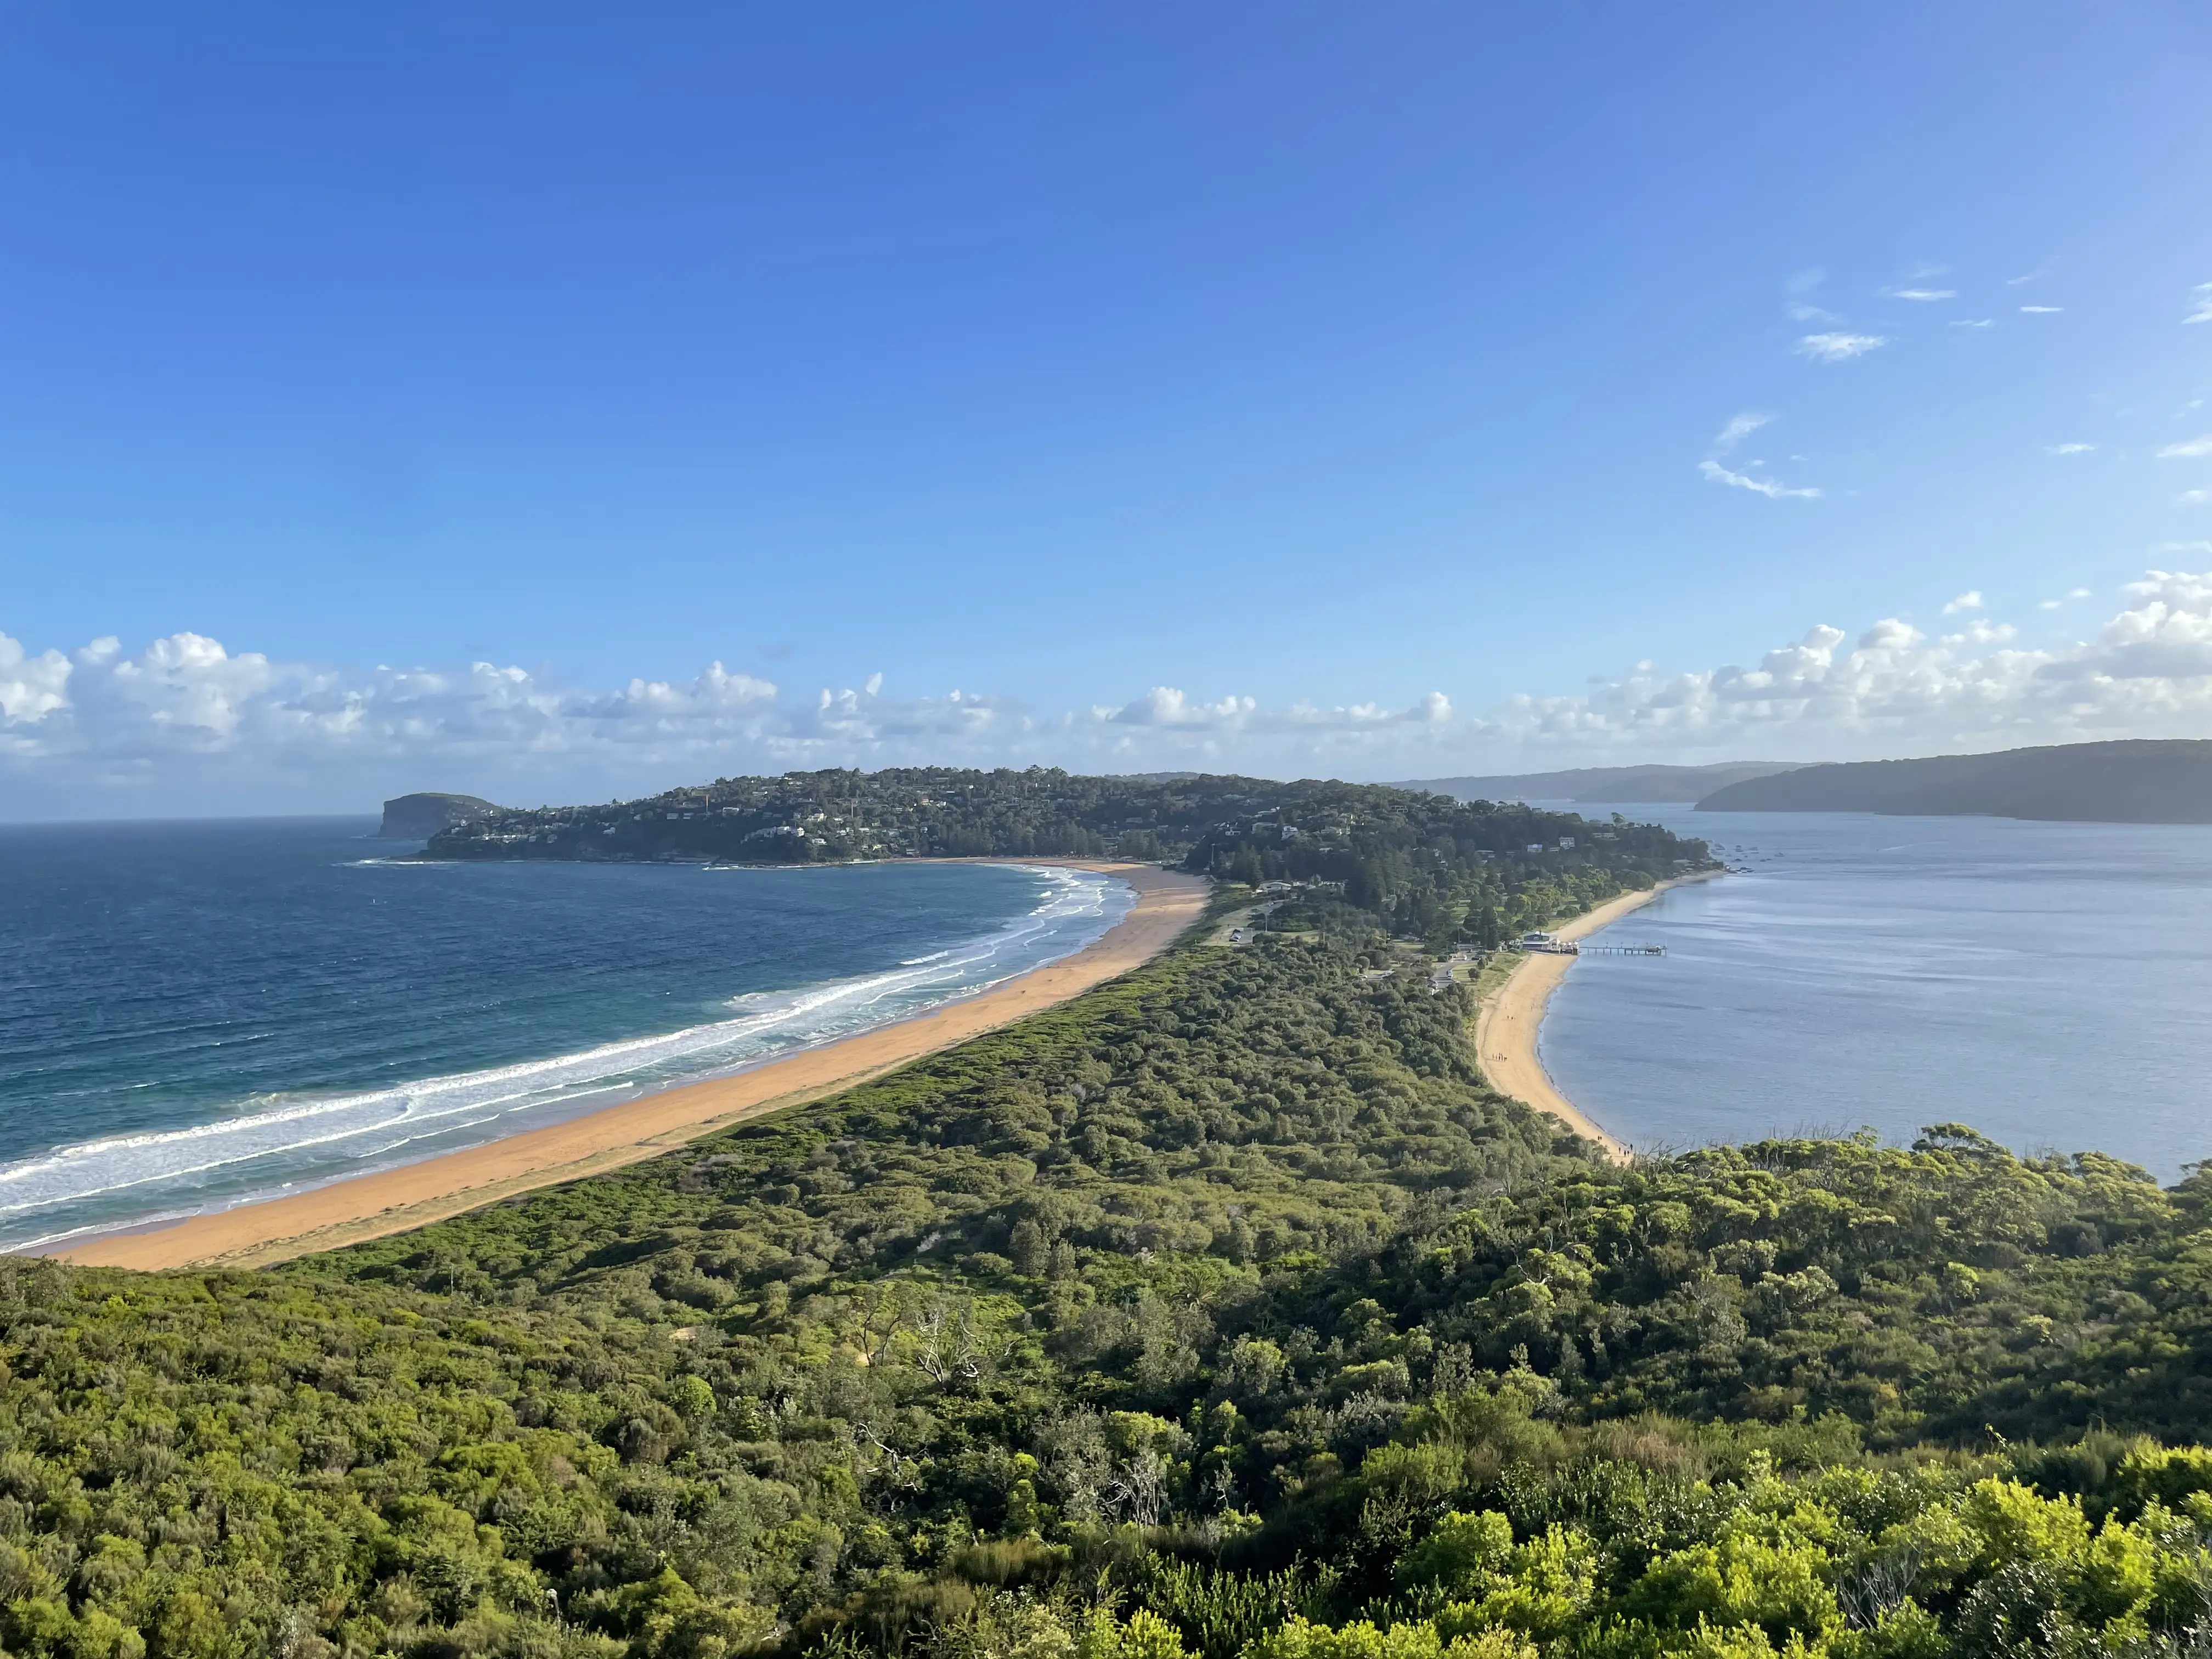 Barrenjoey Lighthouse in North Sydney, with stunning views of a narrow strip of land with water on both sides